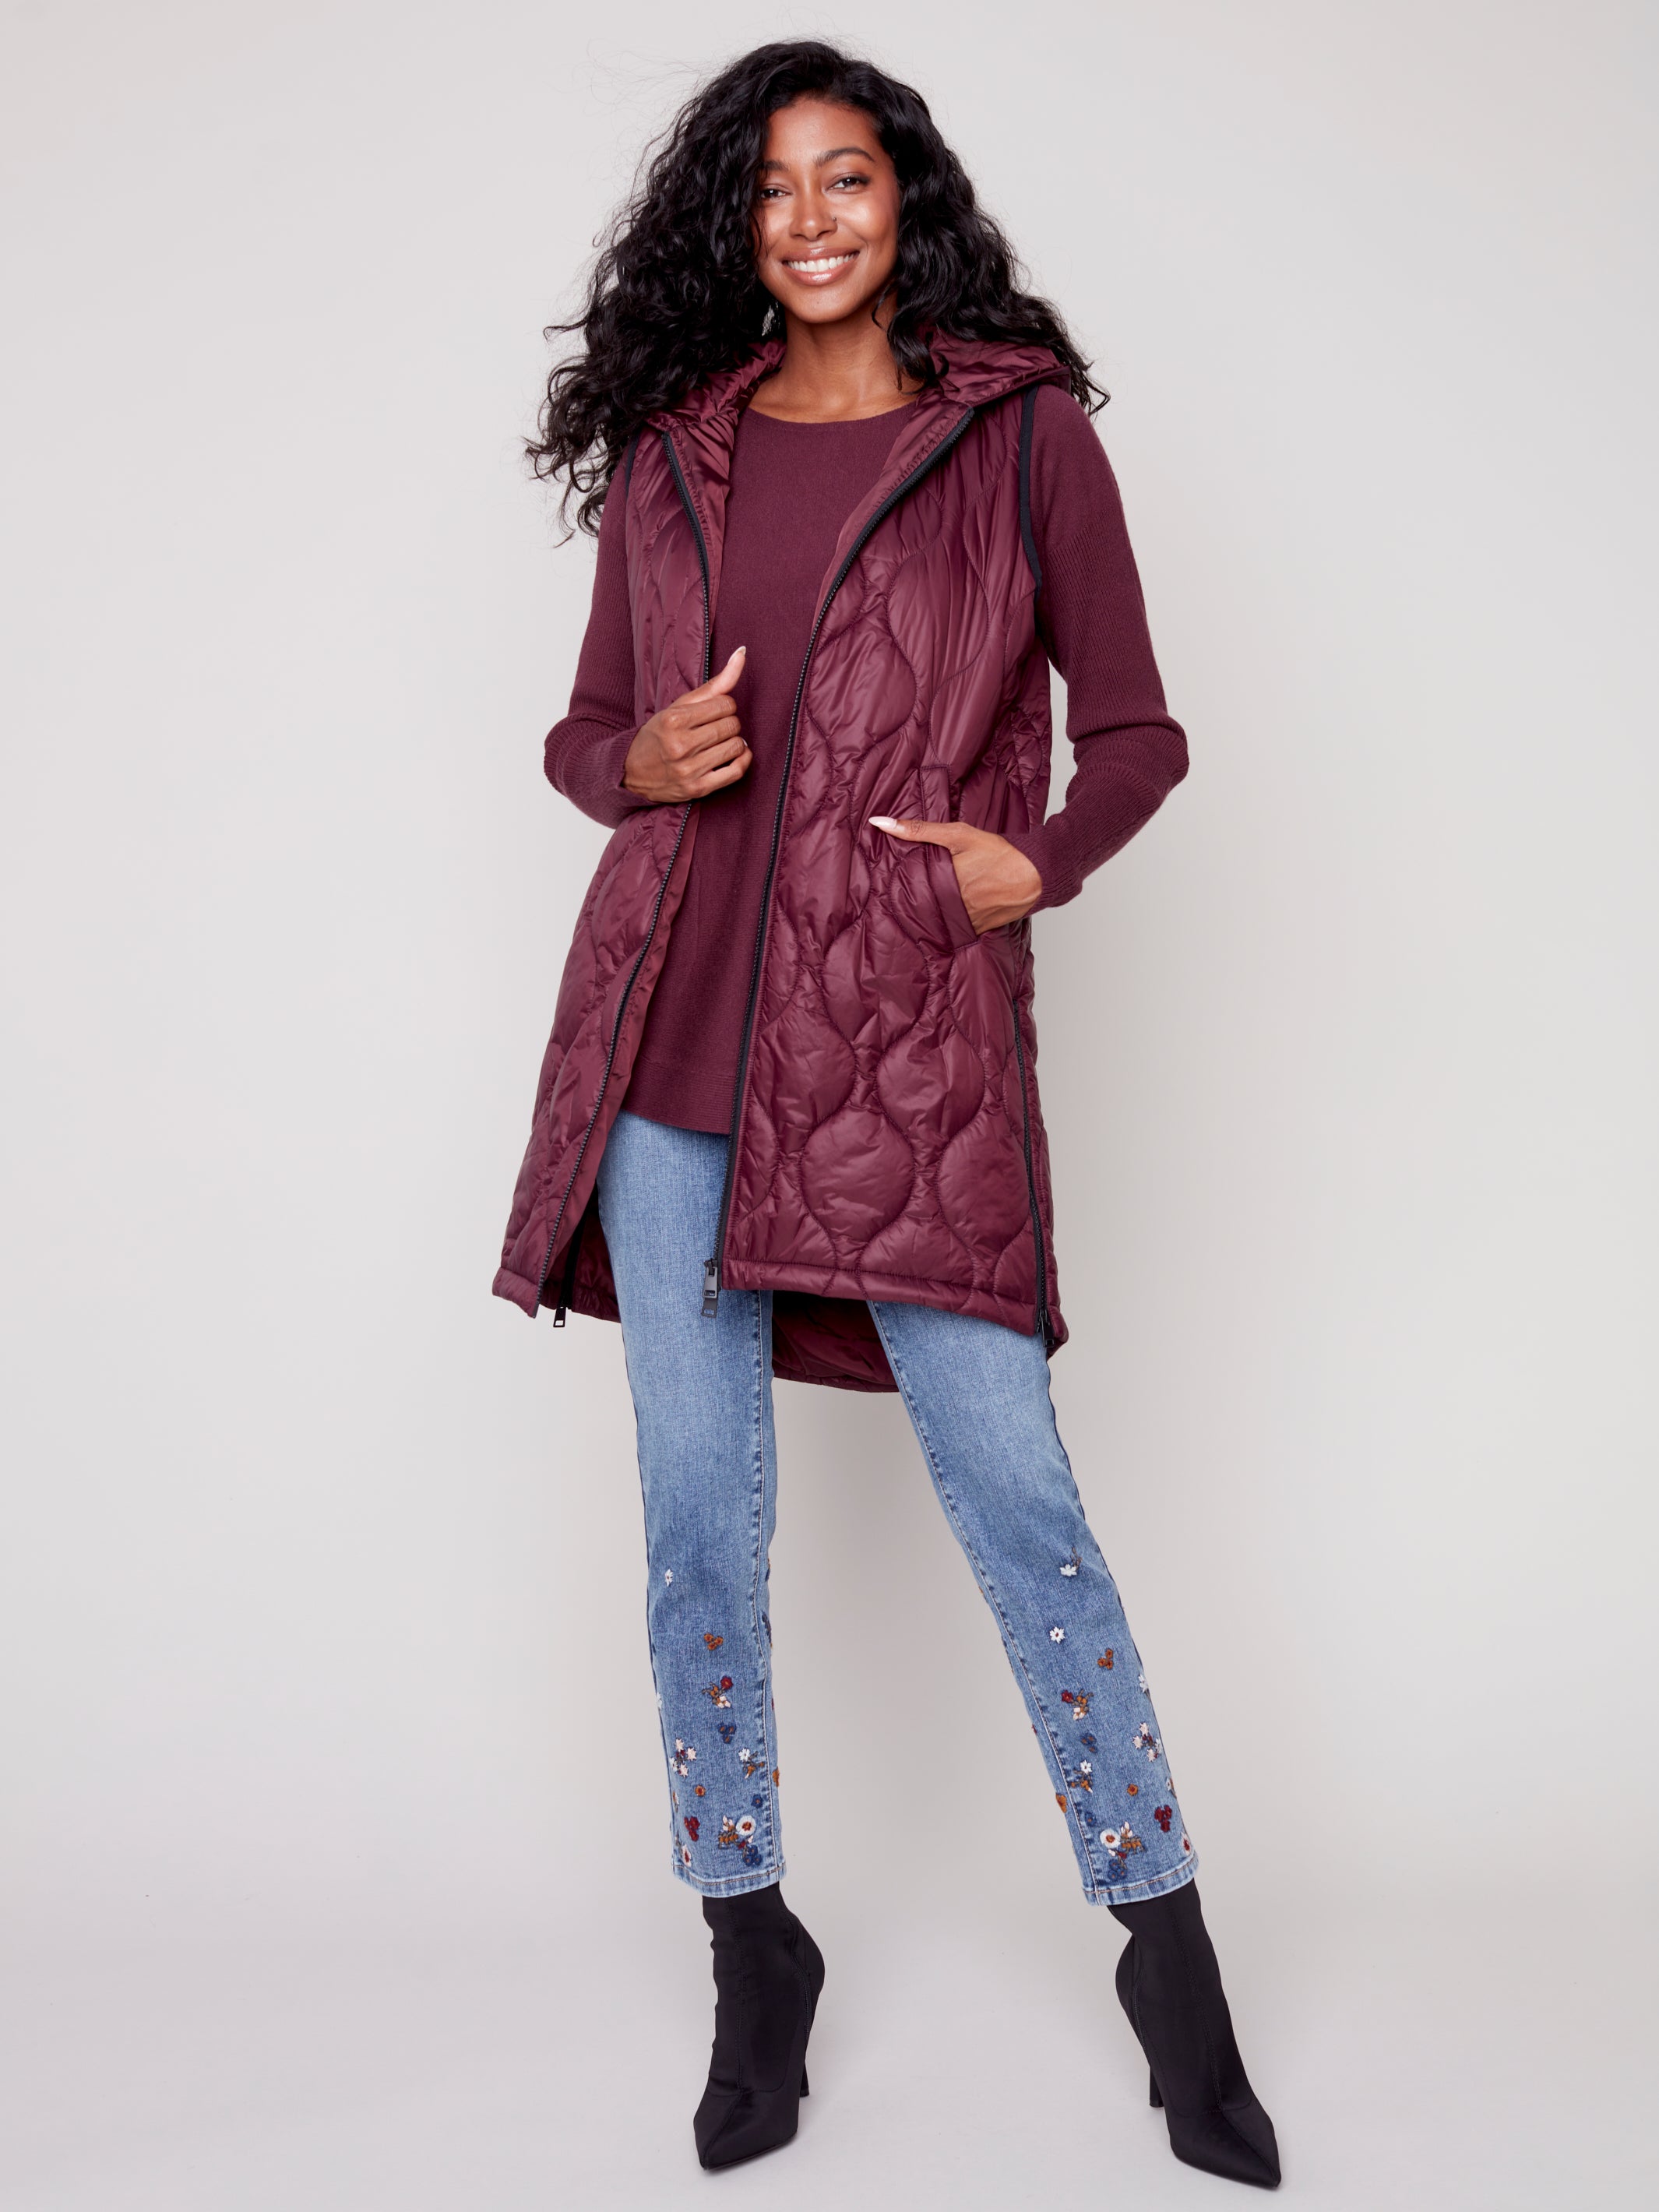 Hooded Long Sleeve Quilted Vest C6268/388B 510